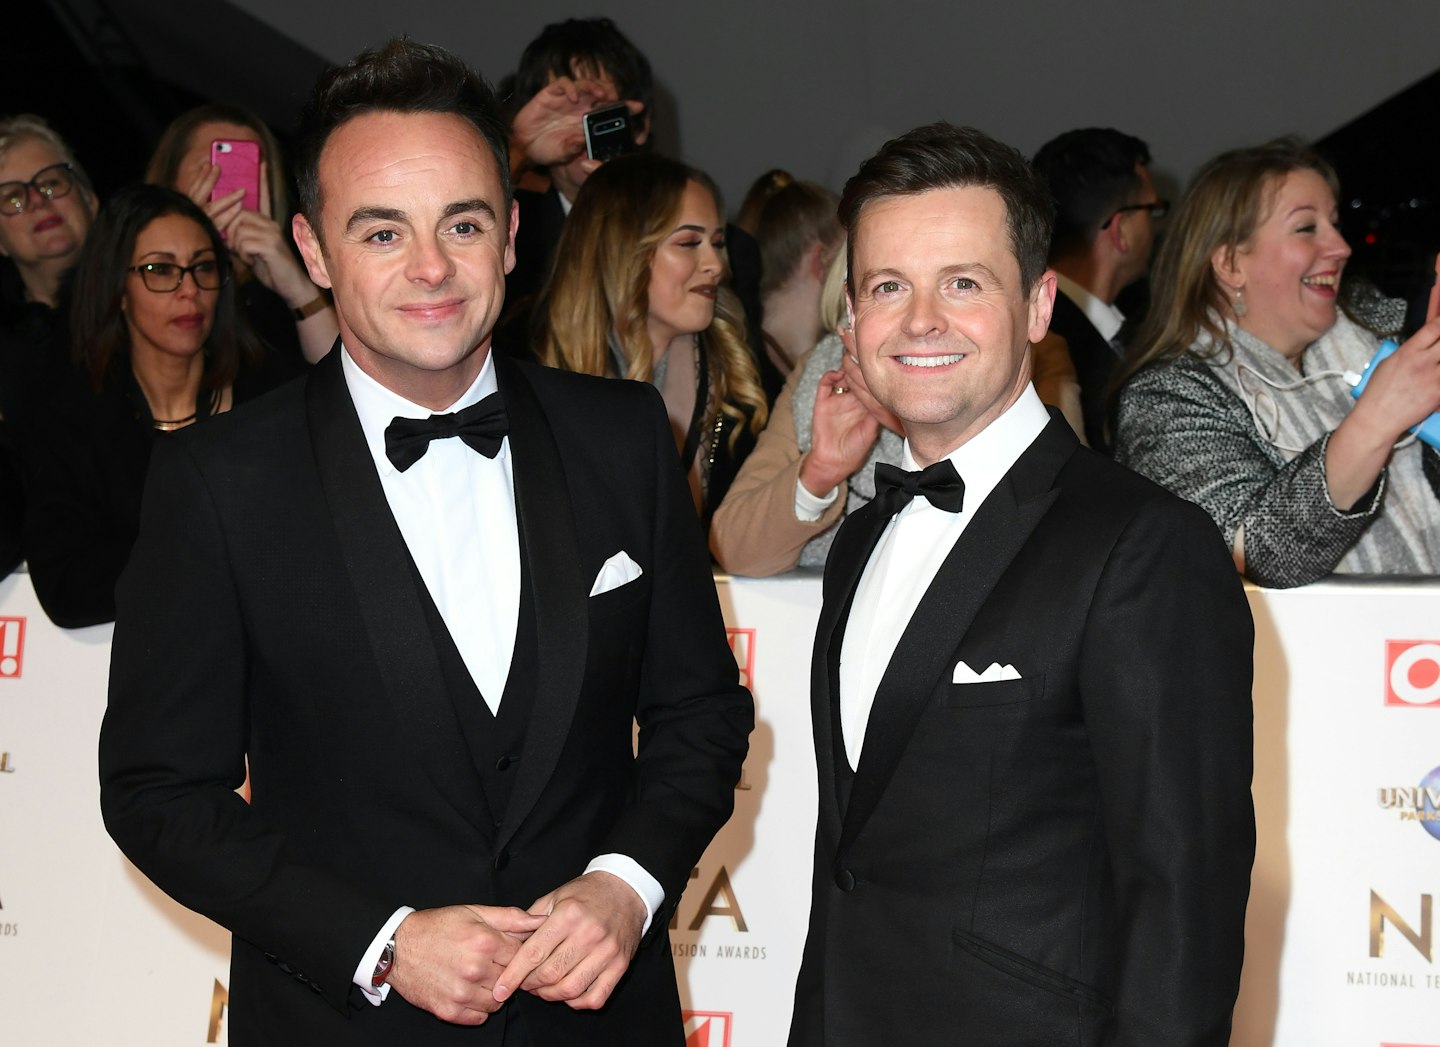 Ant McPartlin and Dec Donnelly